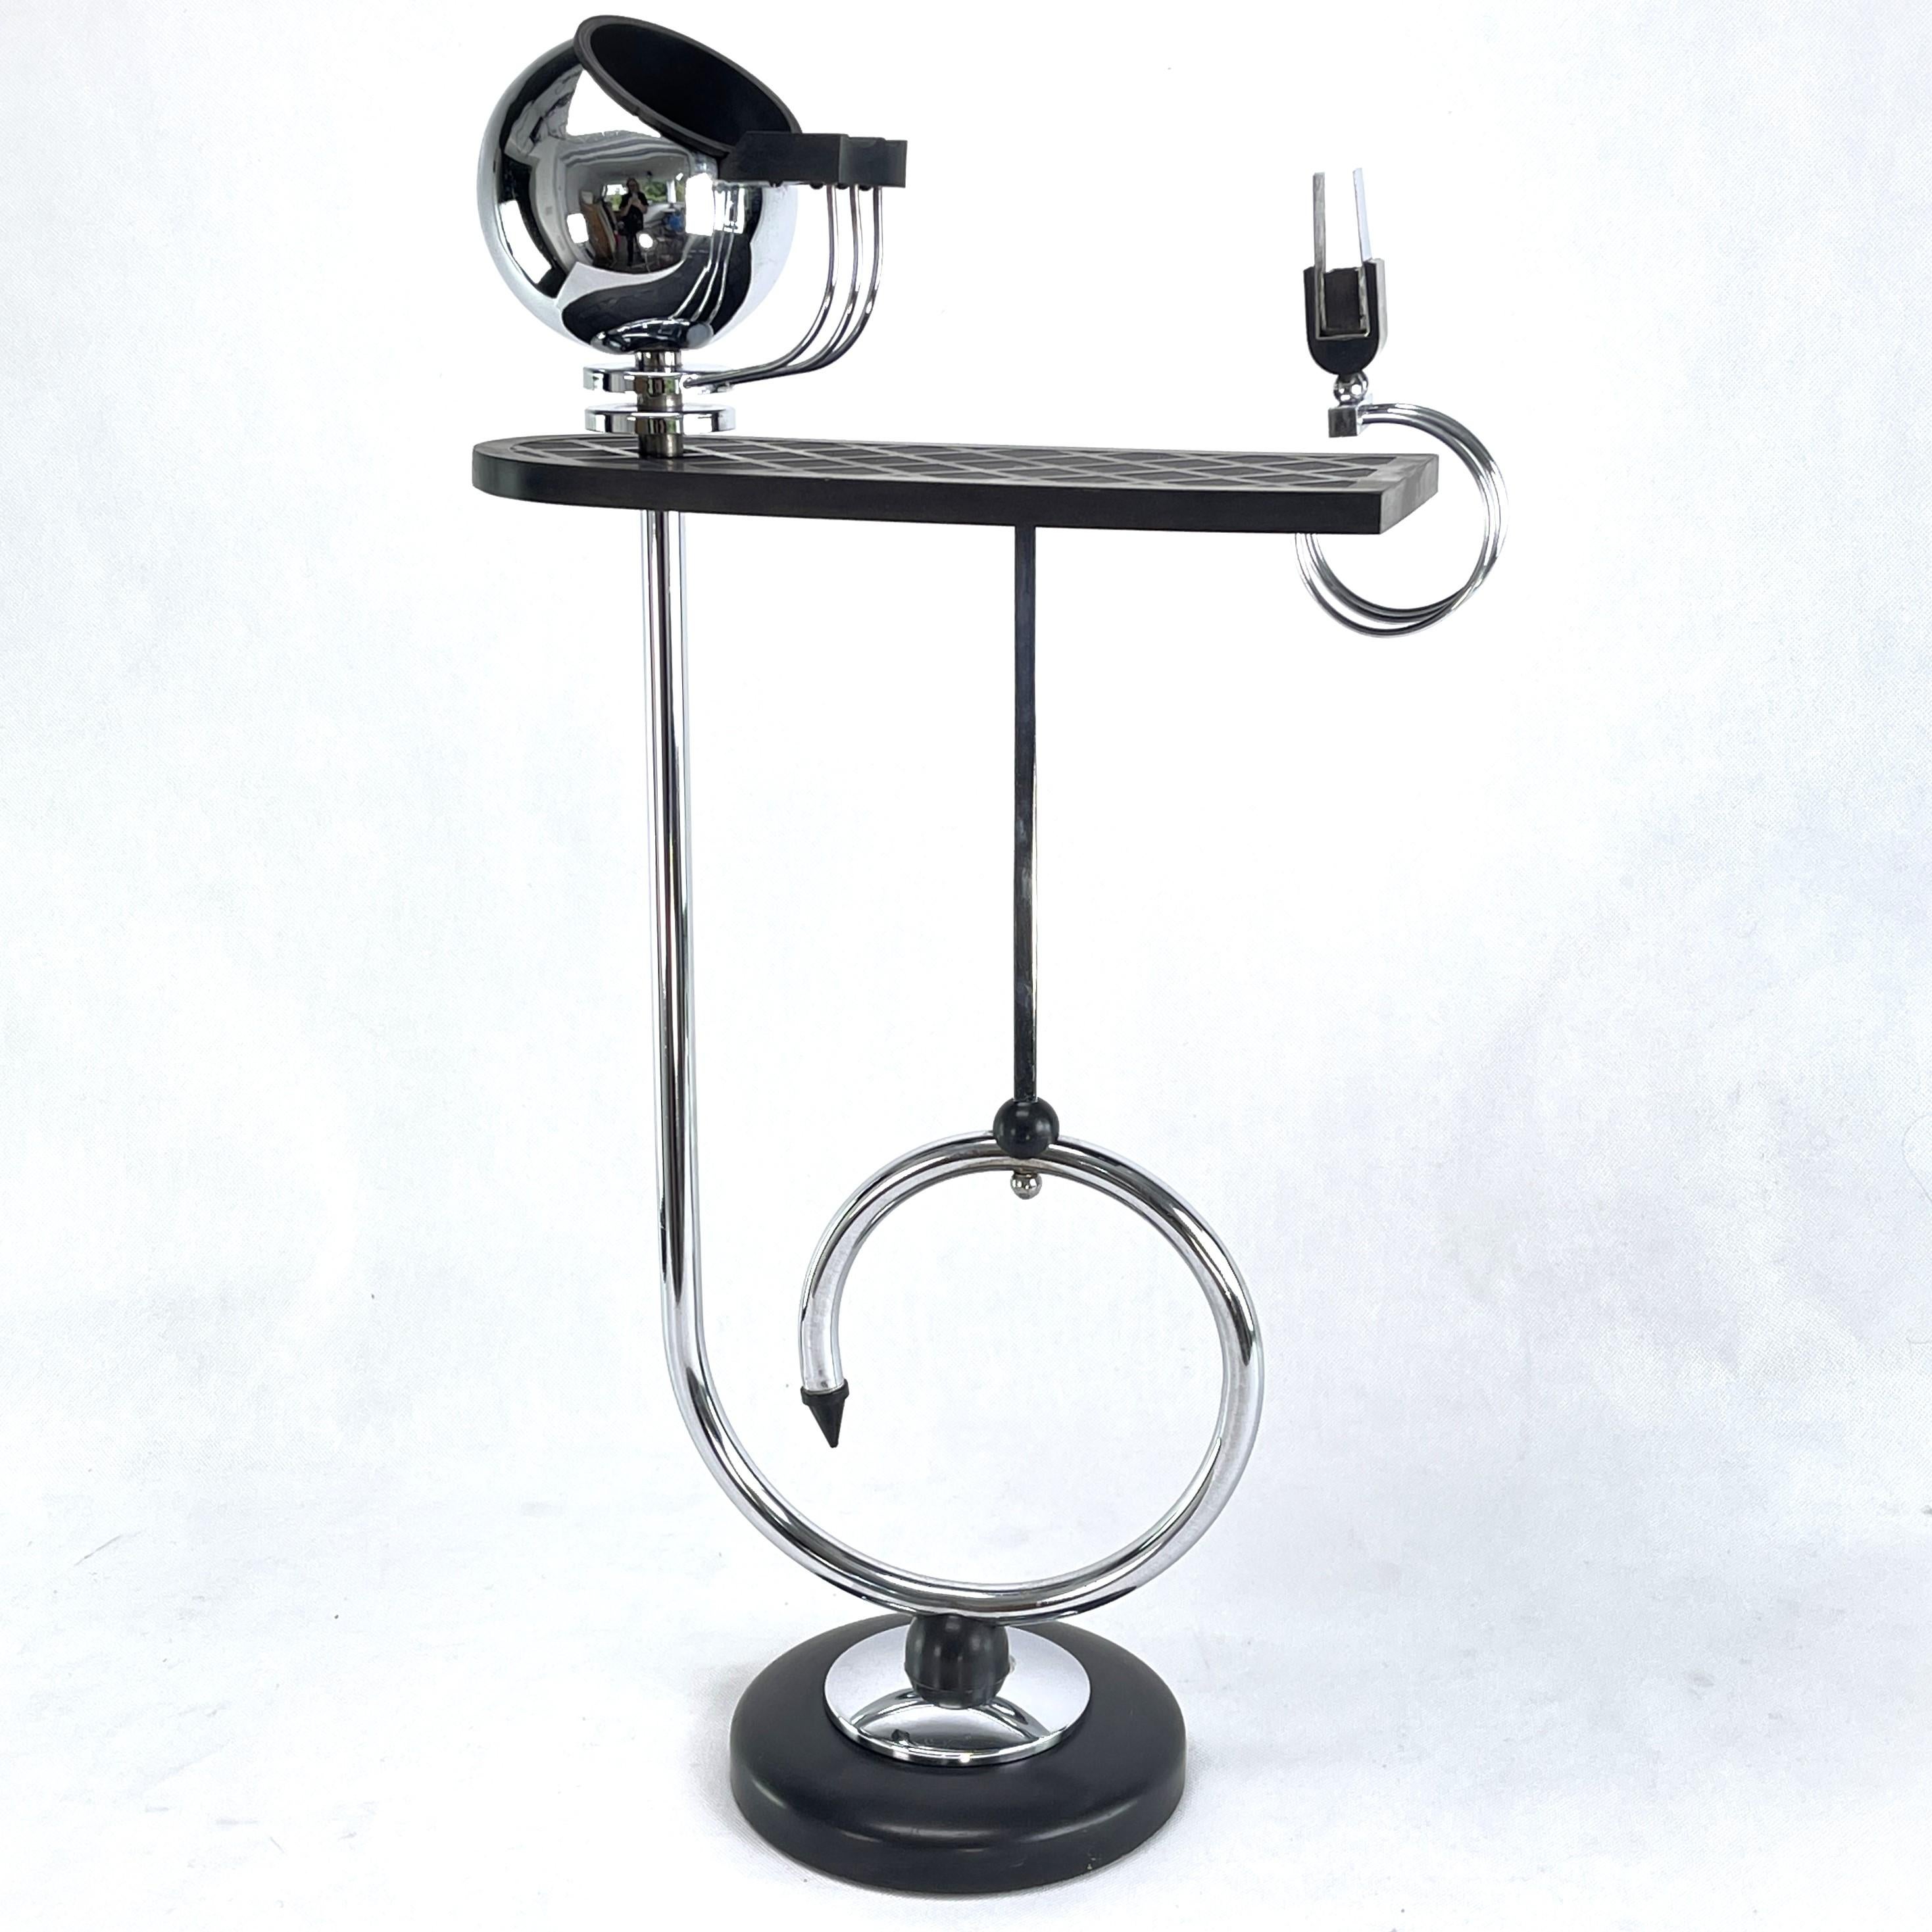 Art Deco ashtray stand by Demeyere

This beautiful and rare Art Deco Ashtray Stand from the 30s/40s is in the streamline modern art deco style. The designer of this extraordinary object has succeeded in combining functionality, design, style and